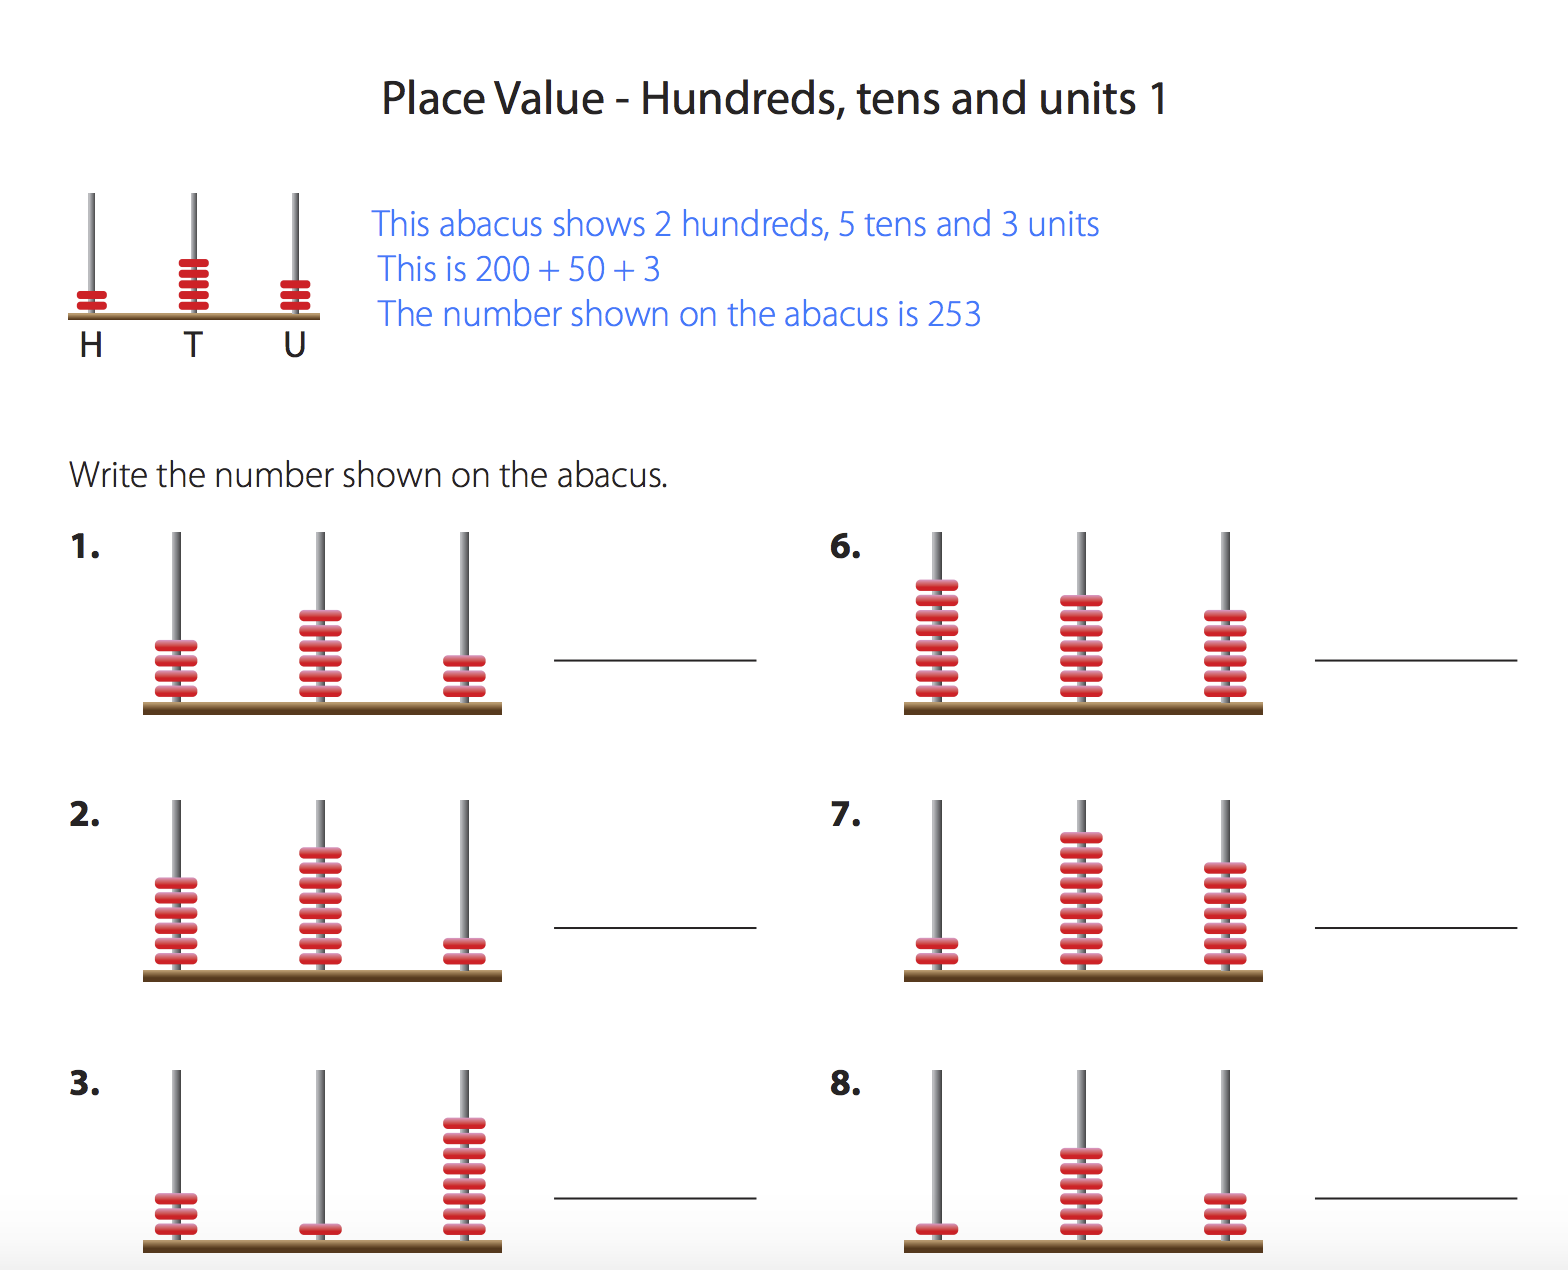 Place Value - Hundreds, Tens and Units (Reading an Abacus) In Ones Tens Hundreds Worksheet